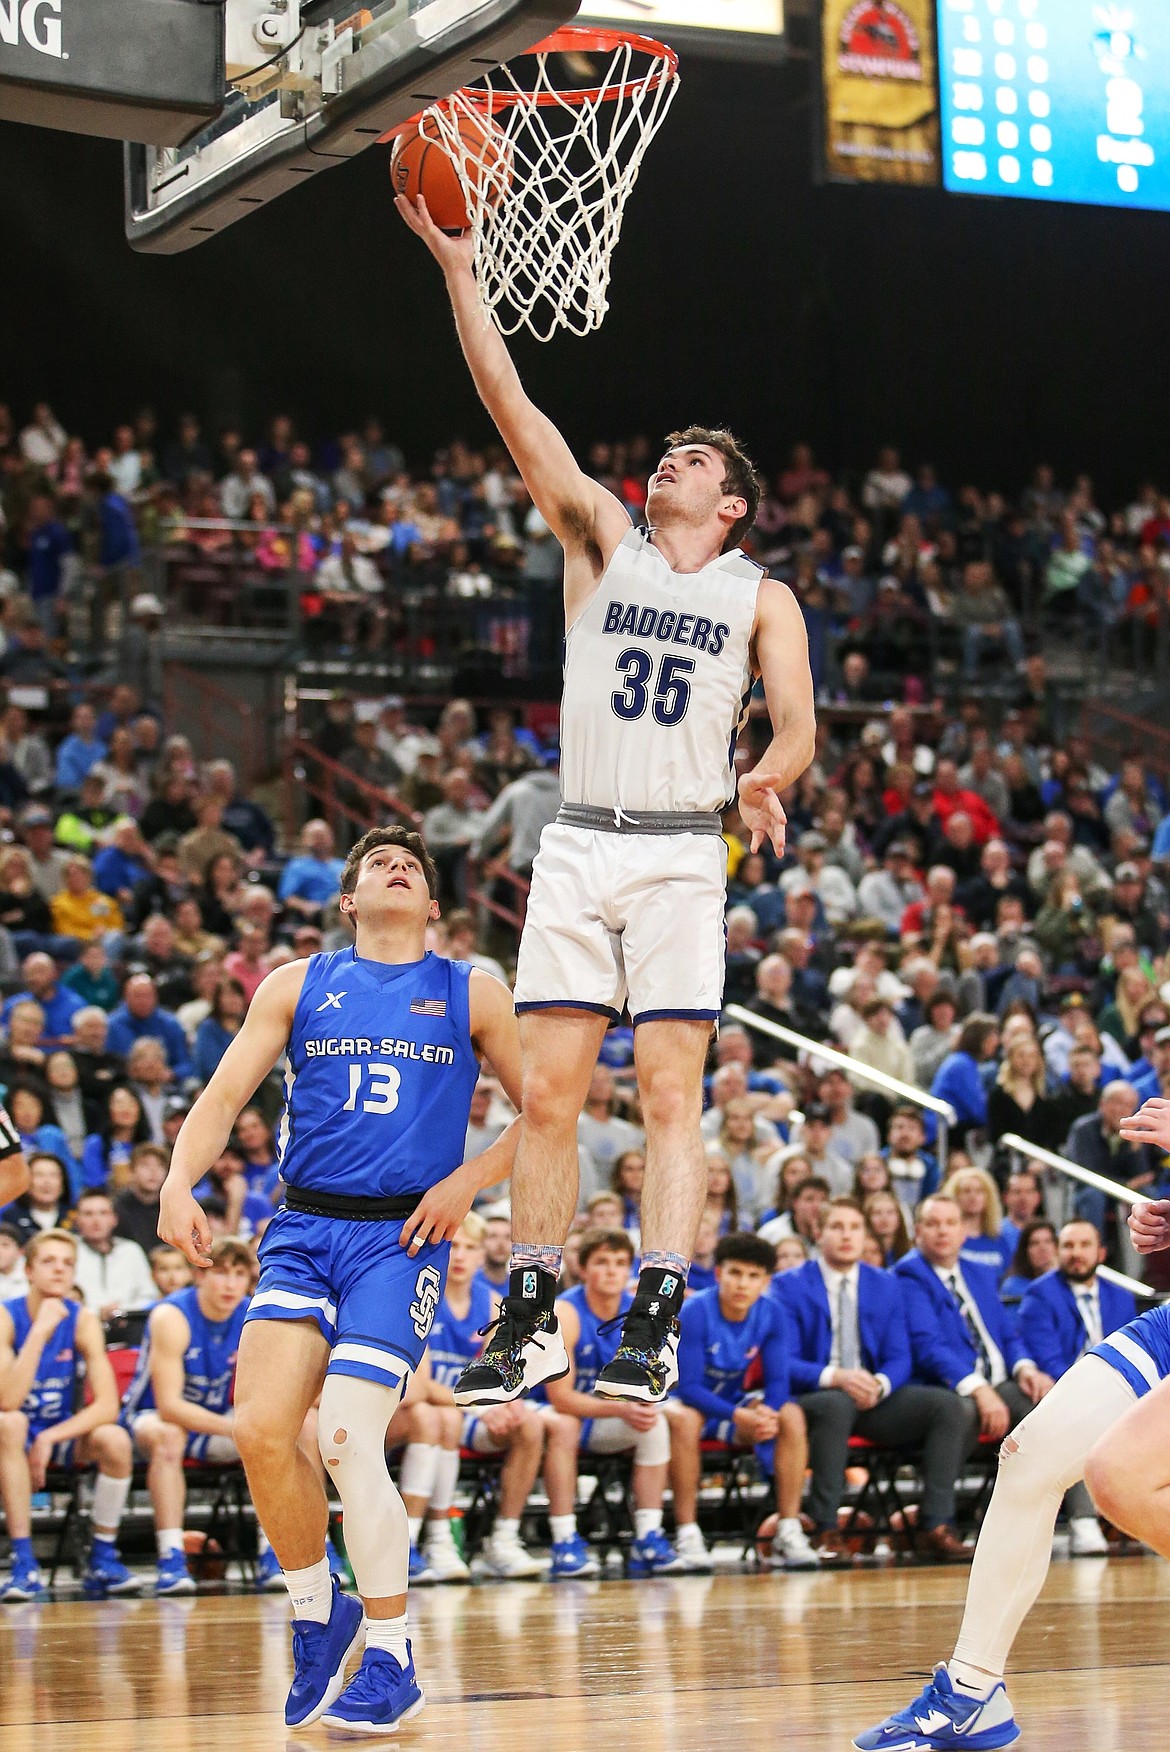 Braeden Blackmore with a layin against Sugar Salem at the 3A State Championship game March 4.